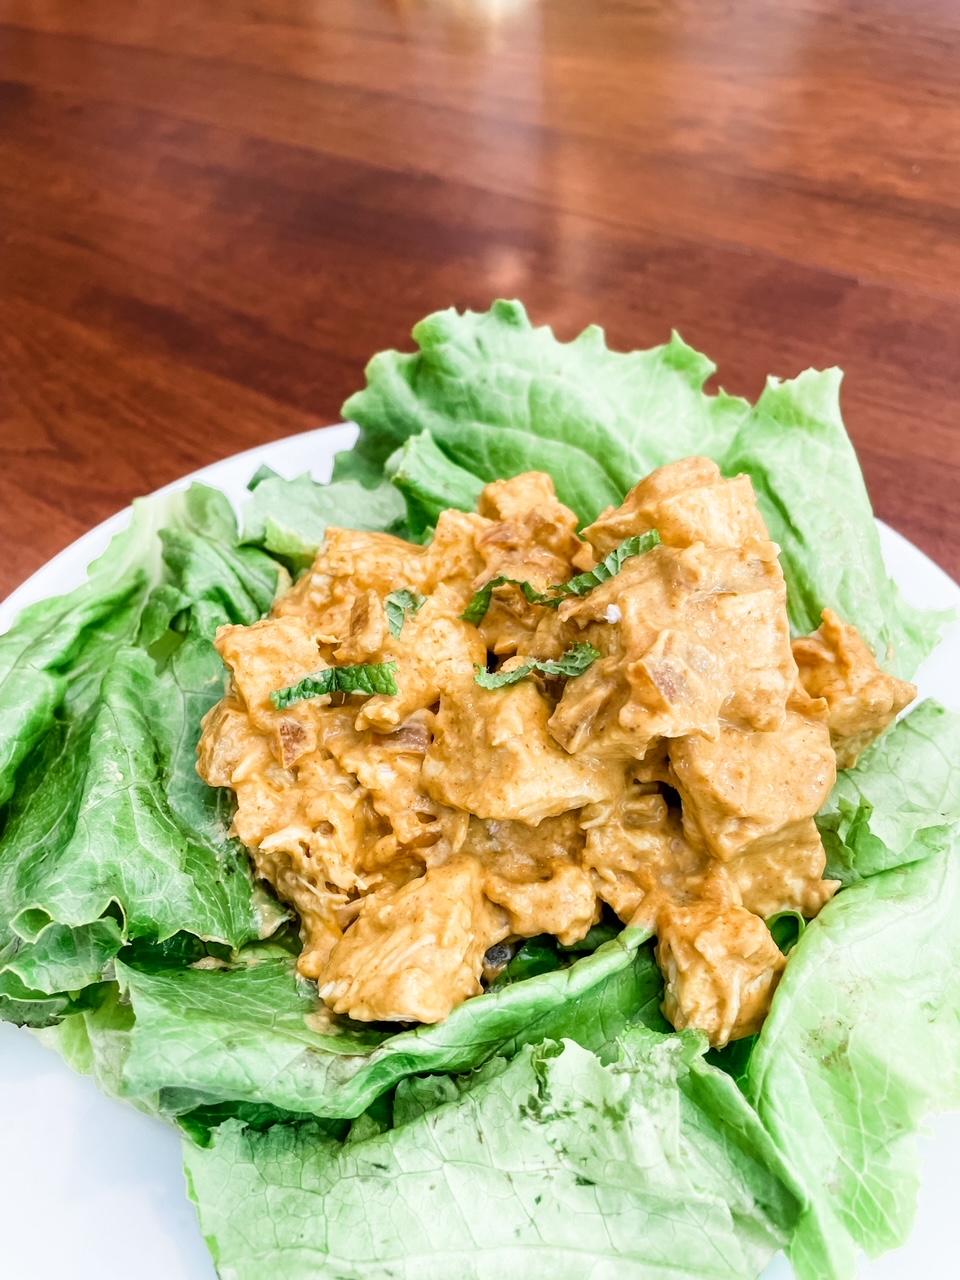 A close up view of the Healthier Coronation Chicken